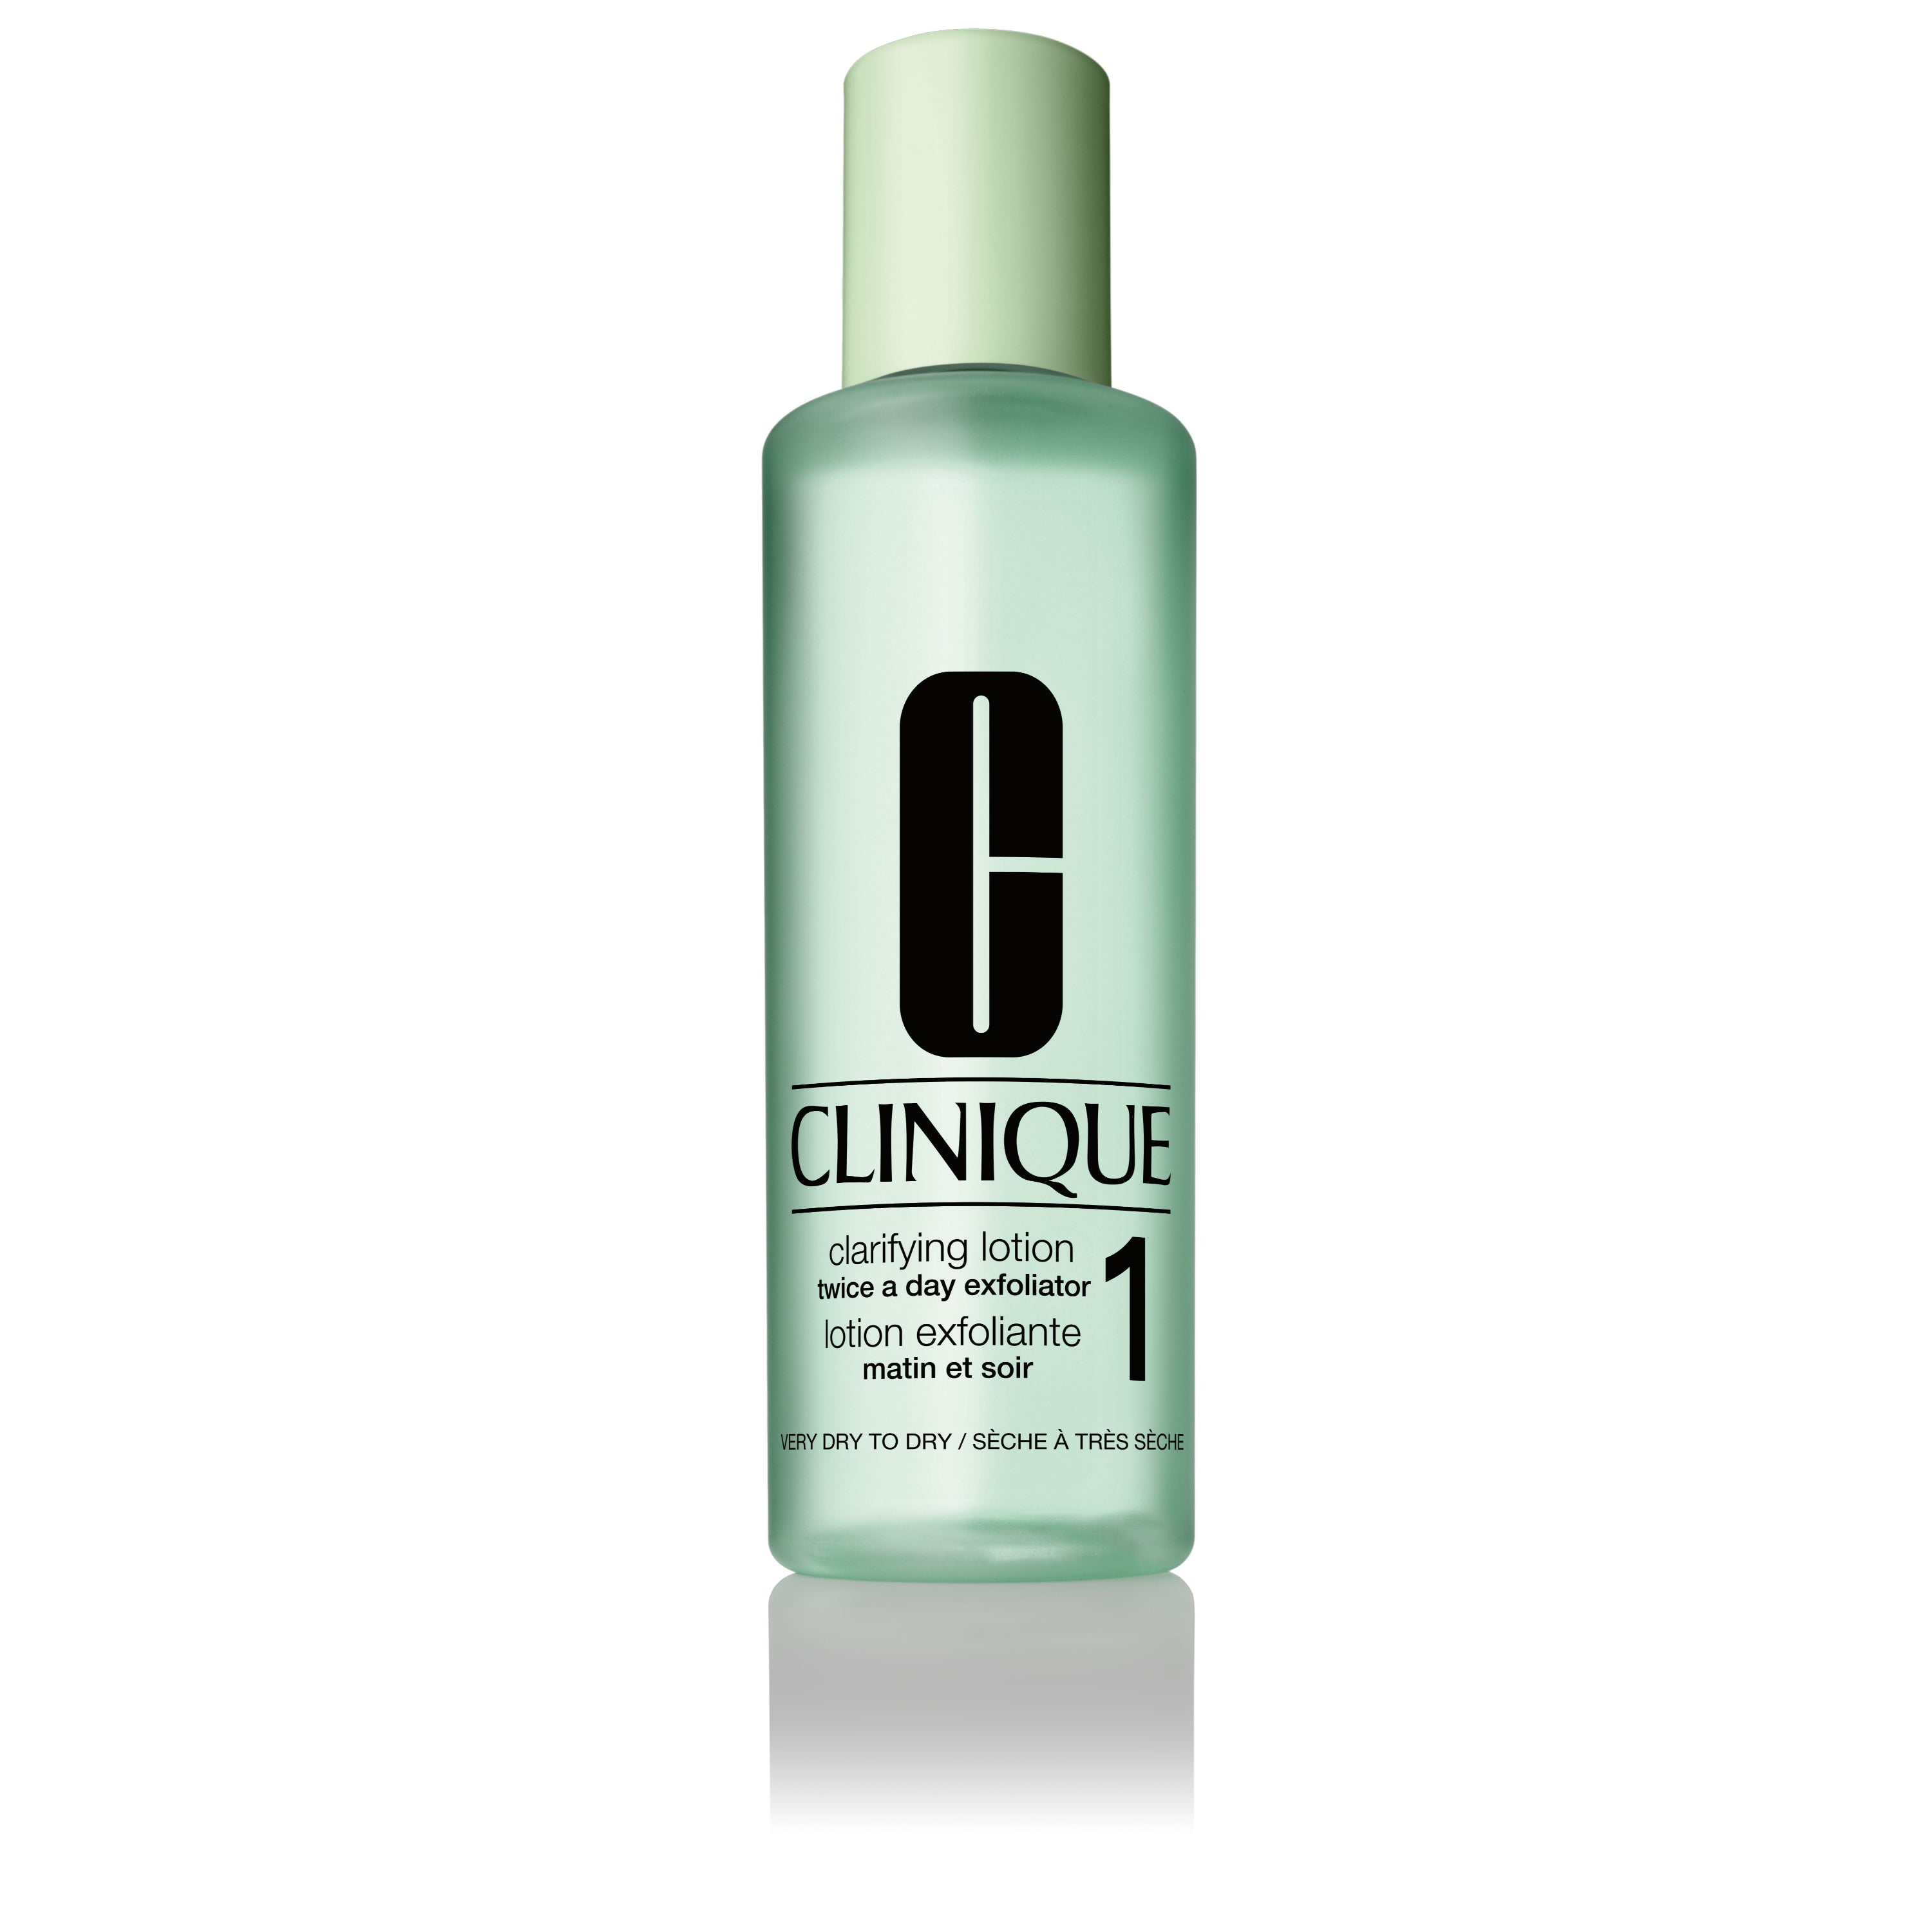 CLINIQUE Clarifying Lotion 1 200ml